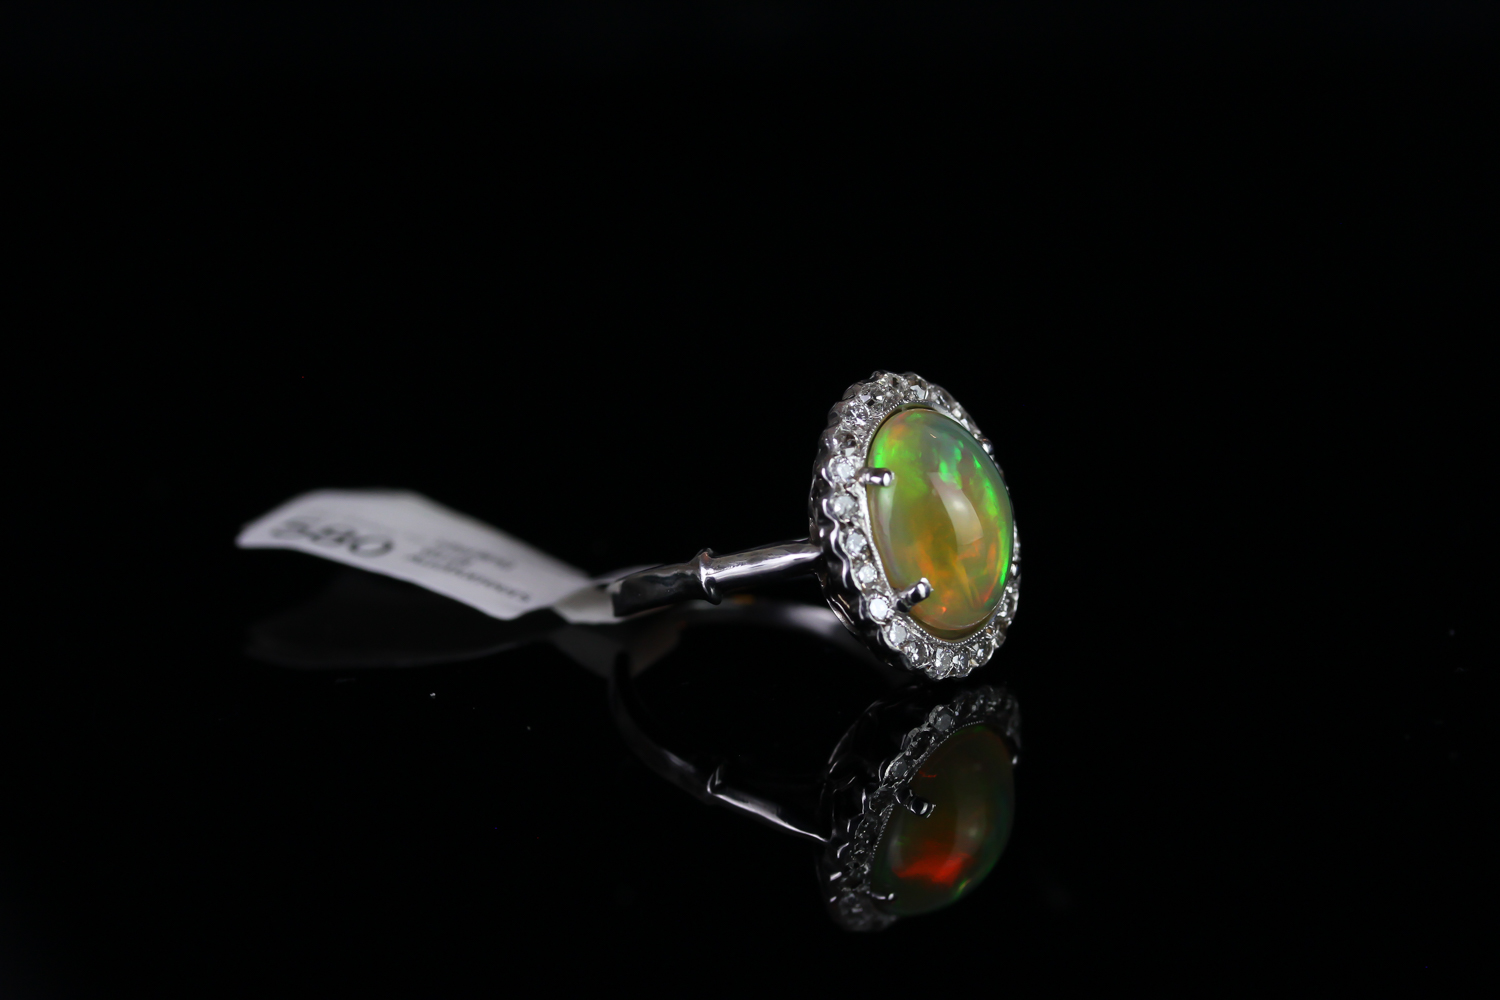 18k OPAL AND DIAMOND CLUSTER RING,centre stone estimated 12x11mm,estimated diamonds total 0.25ct, - Image 2 of 3